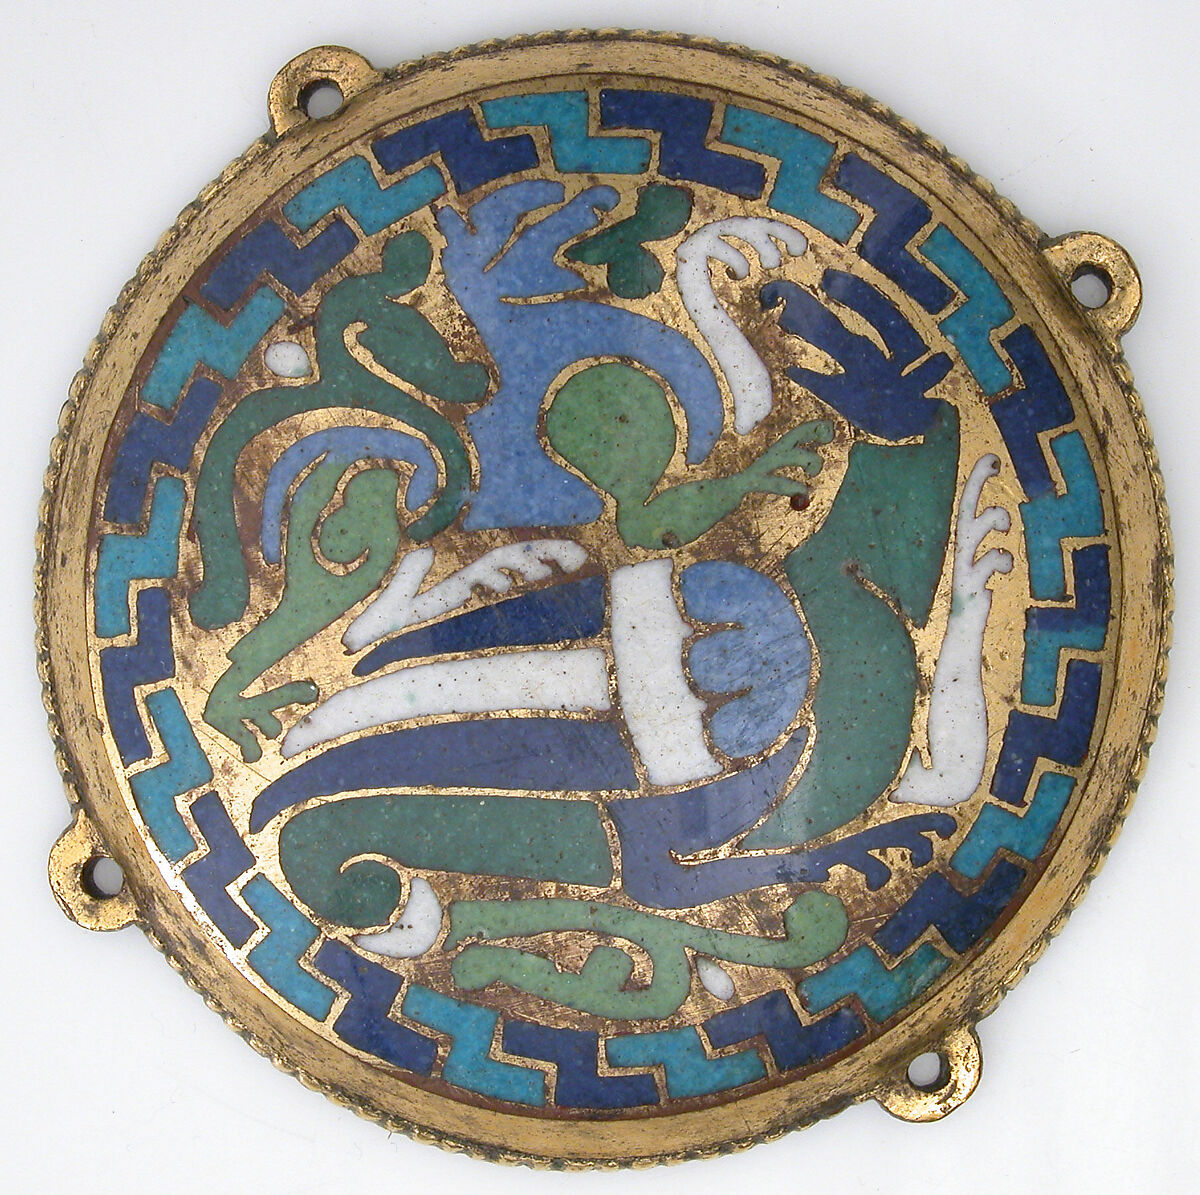 Combat Between Dragon and Dog (one of five medallions from a coffret), Copper-gilt, champlevé enamel, French 